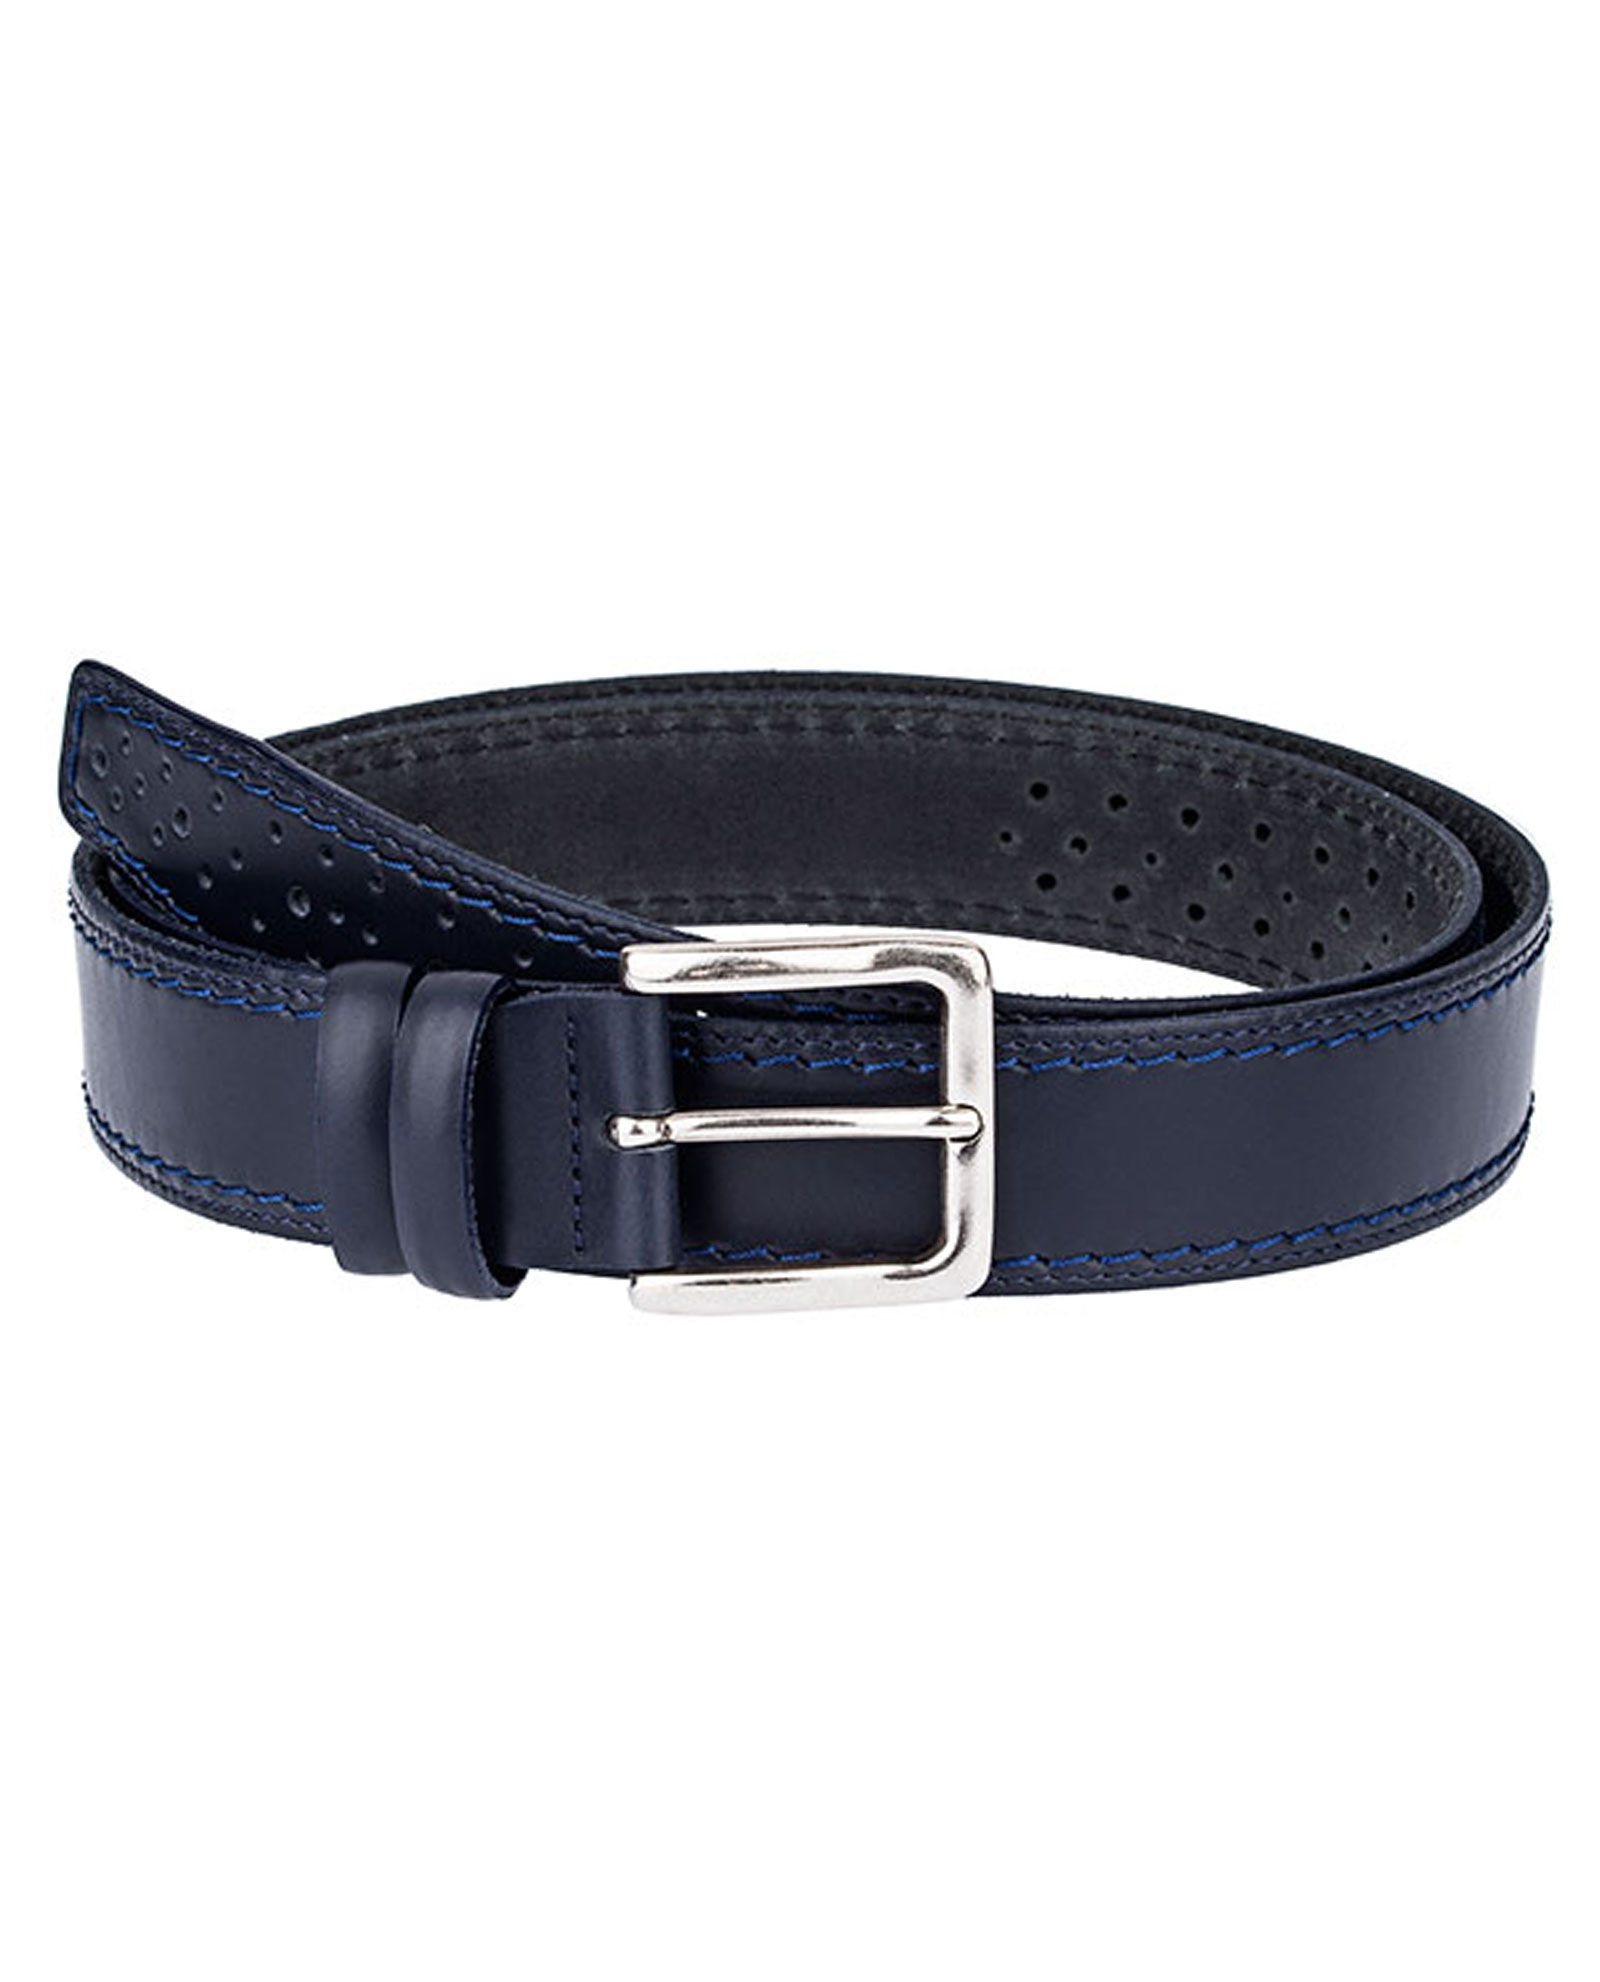 Buy Blue Italian Leather Belt - Perforated - Free Shipping